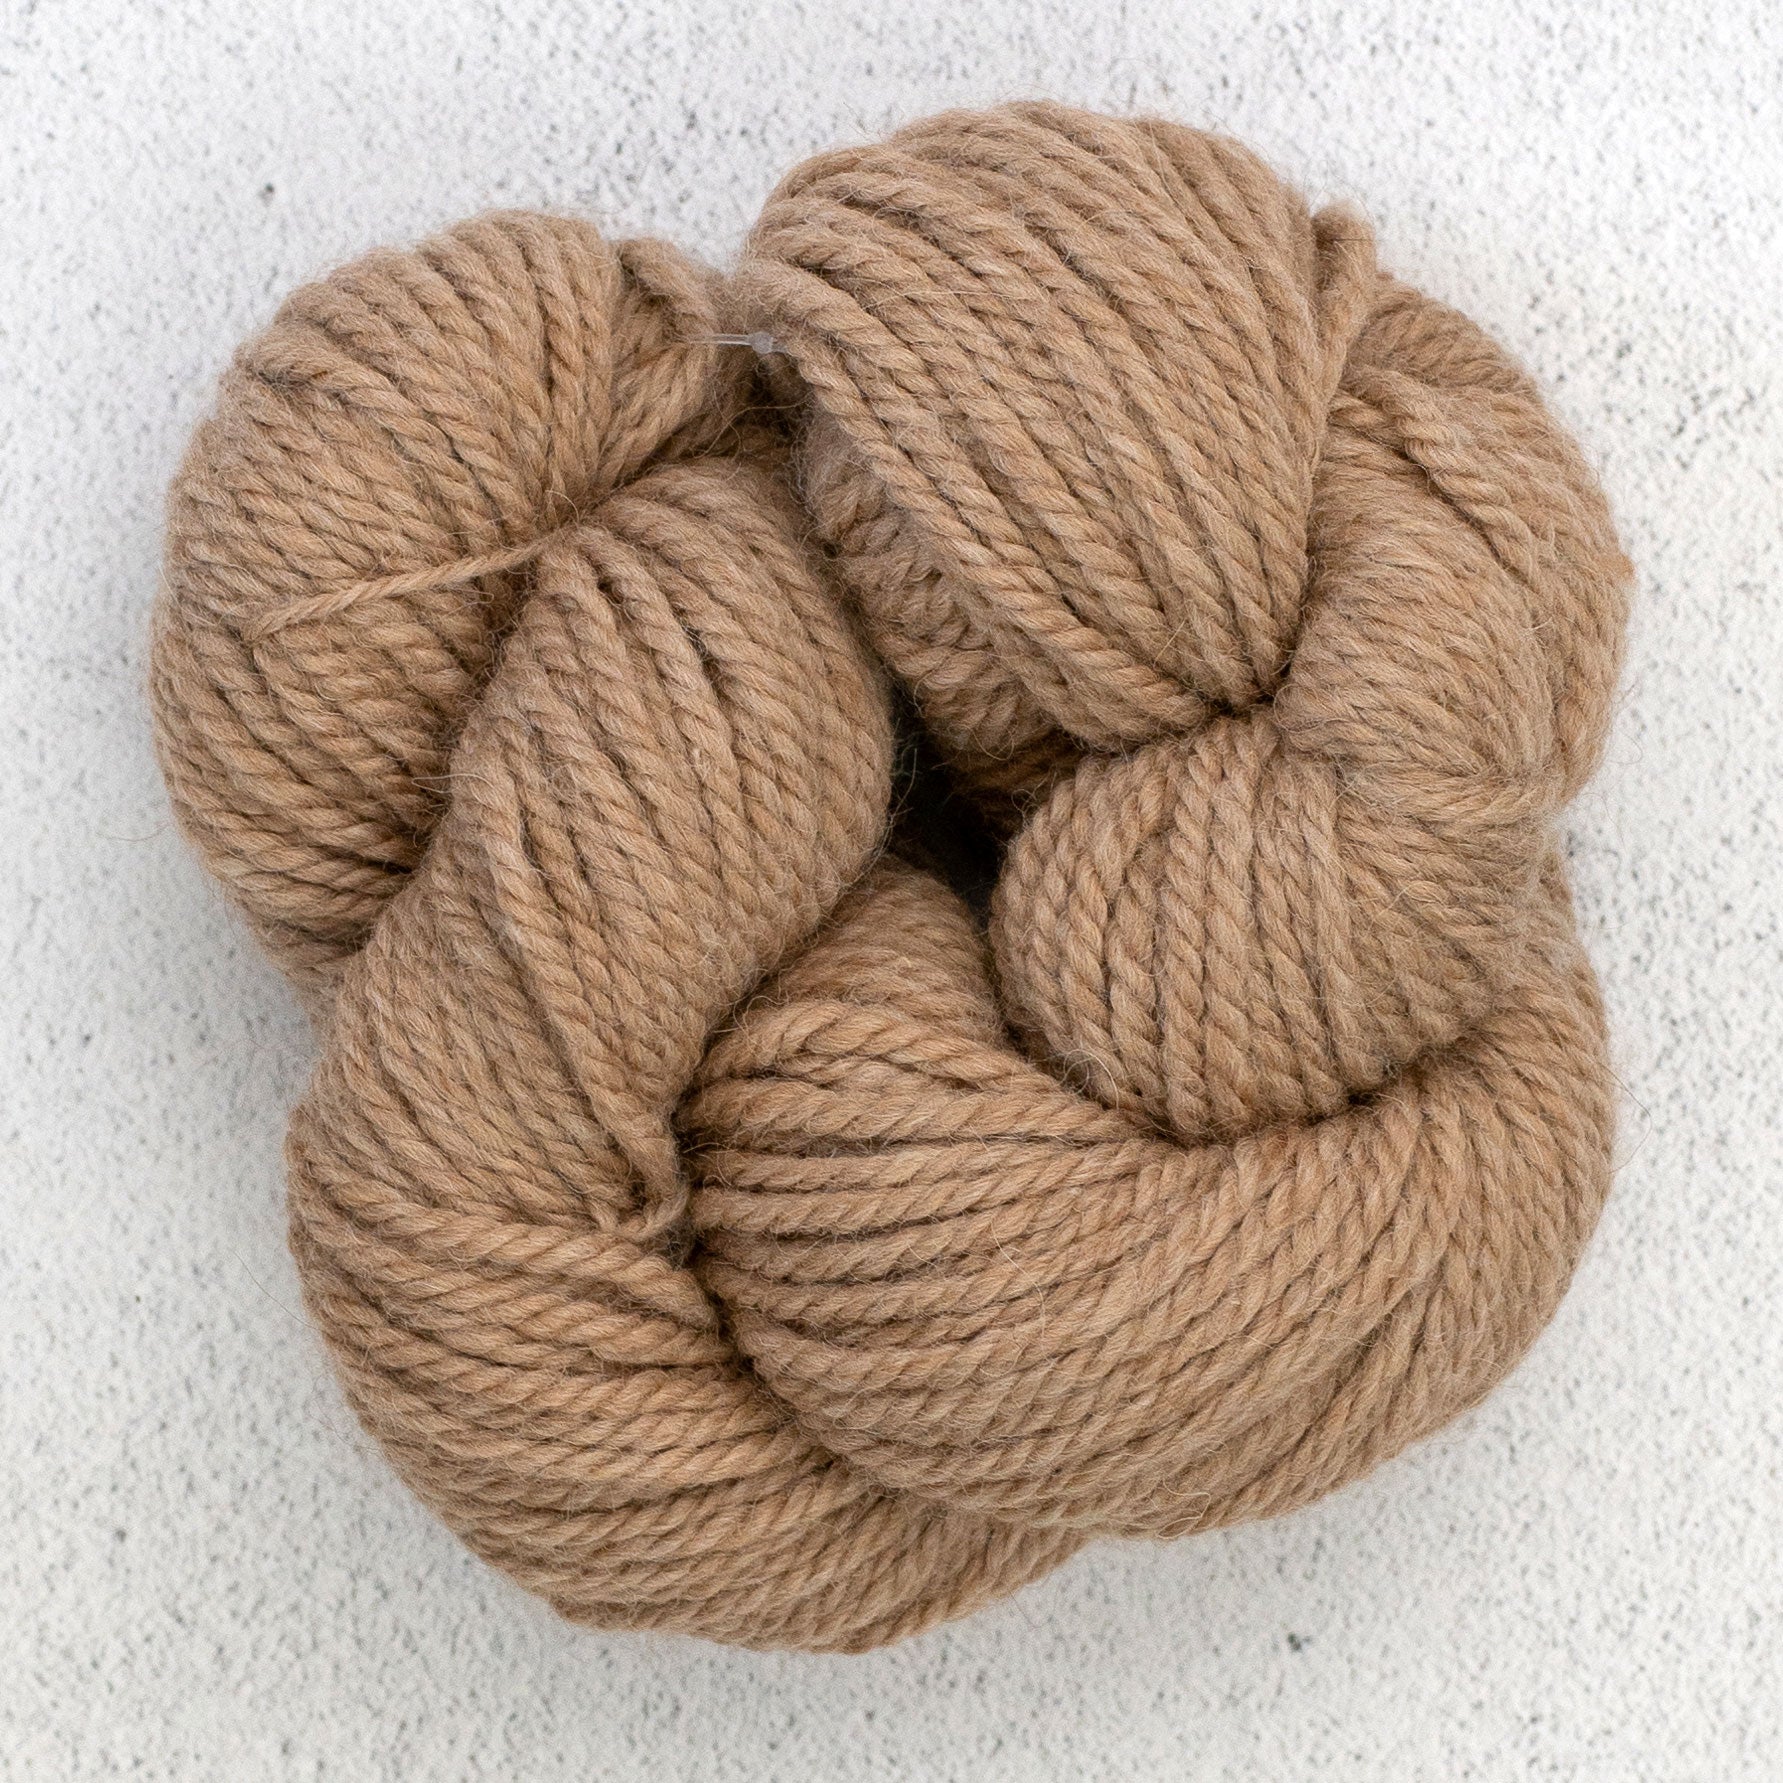 100% Baby Alpaca Yarn (Weight #5) Bulky, CHUNKY, CRAFT - SET OF 3 Skeins  150 GRAMS TOTAL - Luxuriously and CARING SOFT - Llacta